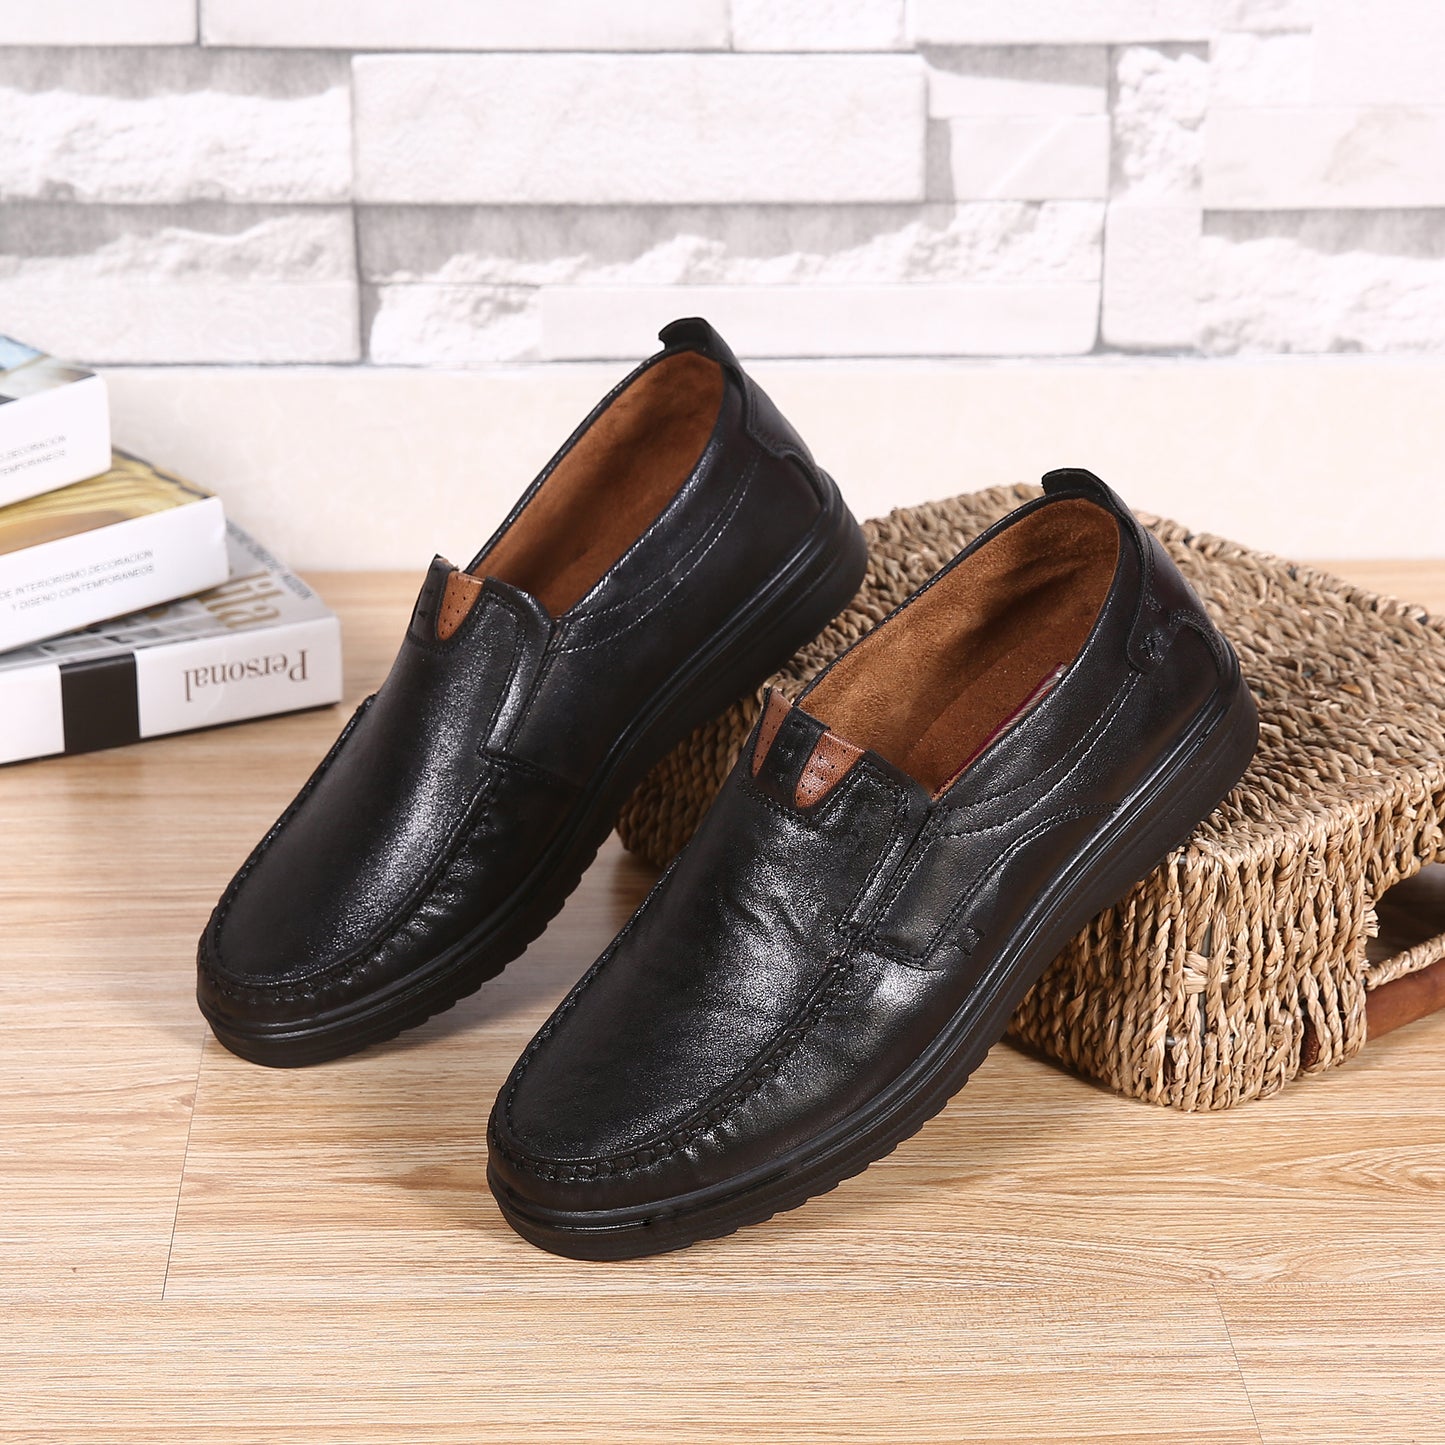 Men Solid Leather Shoes Soft Sole Leisure Driving Antislip